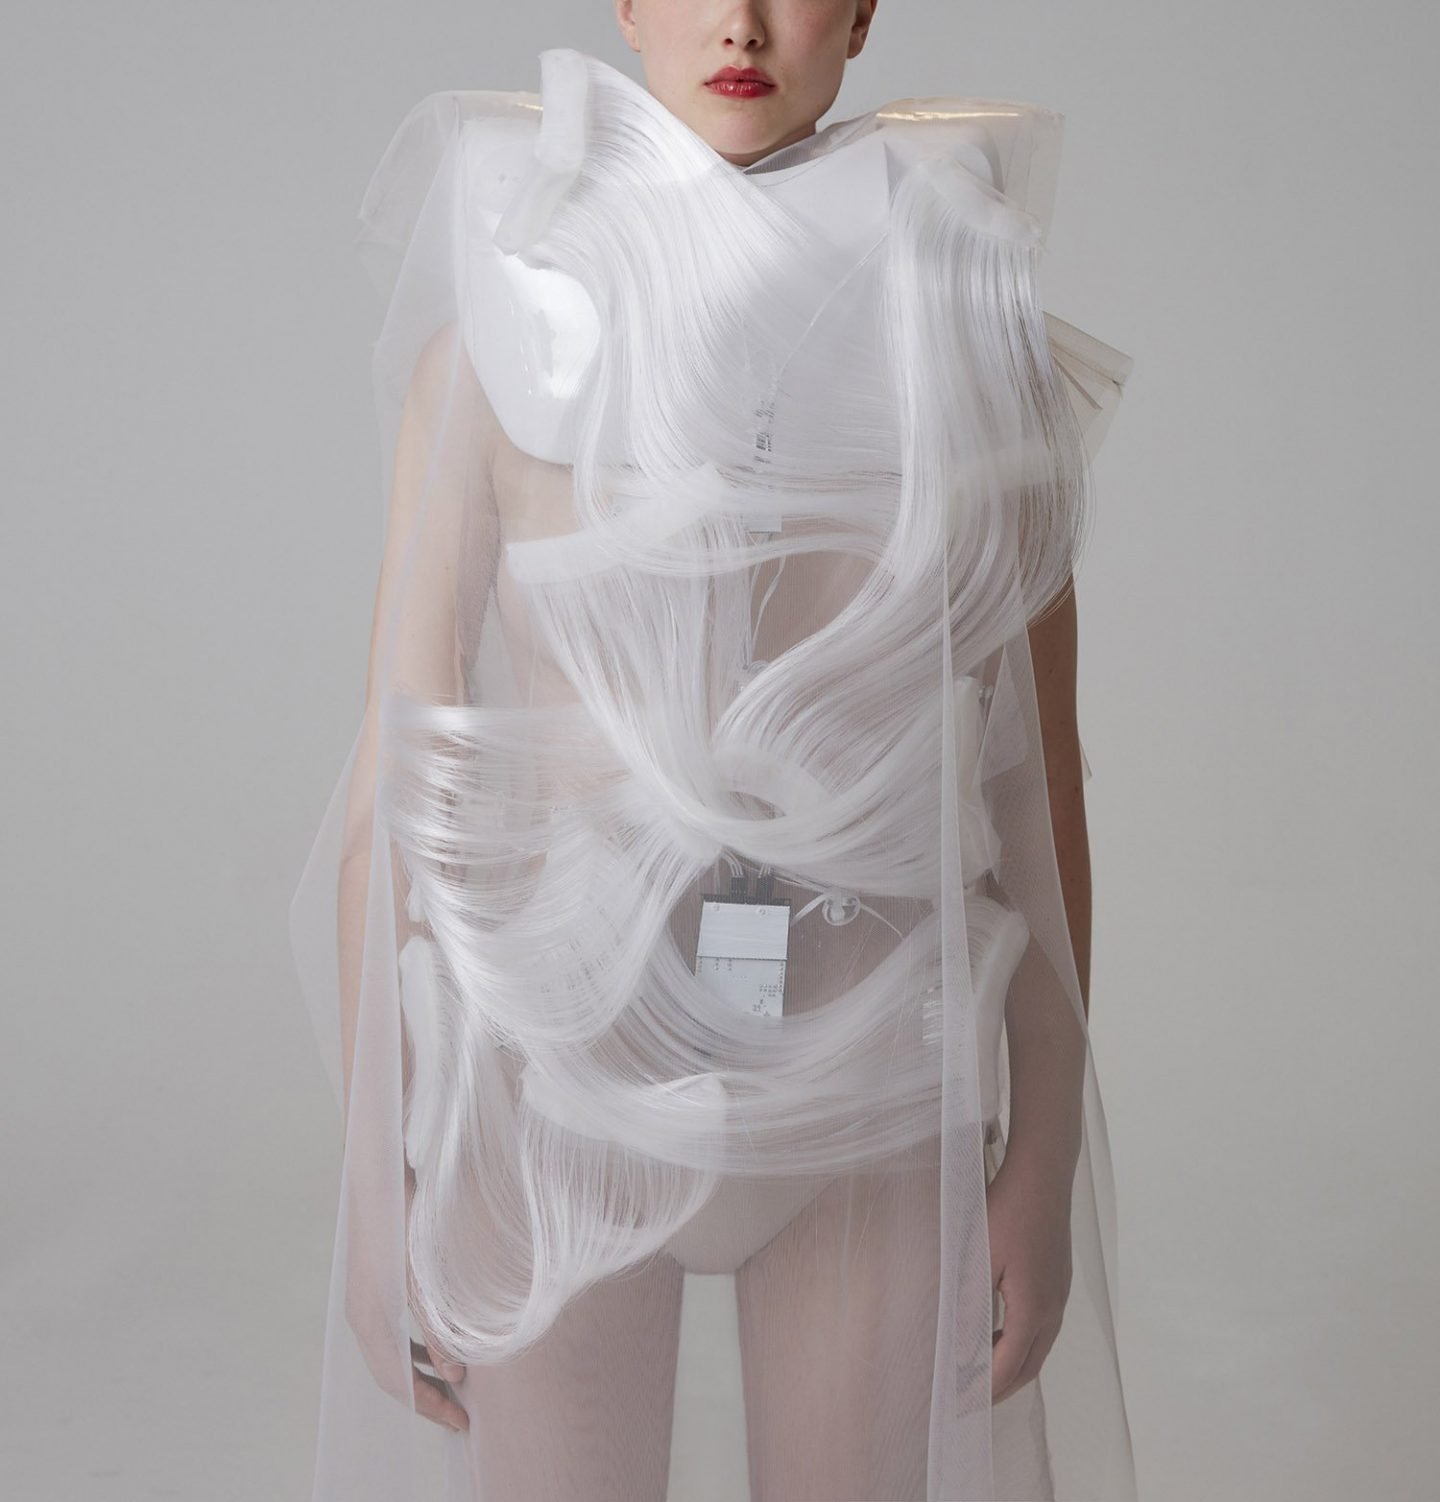 iGNANT_Fashion_Ying_Gao_Possible_Tomorrows_5